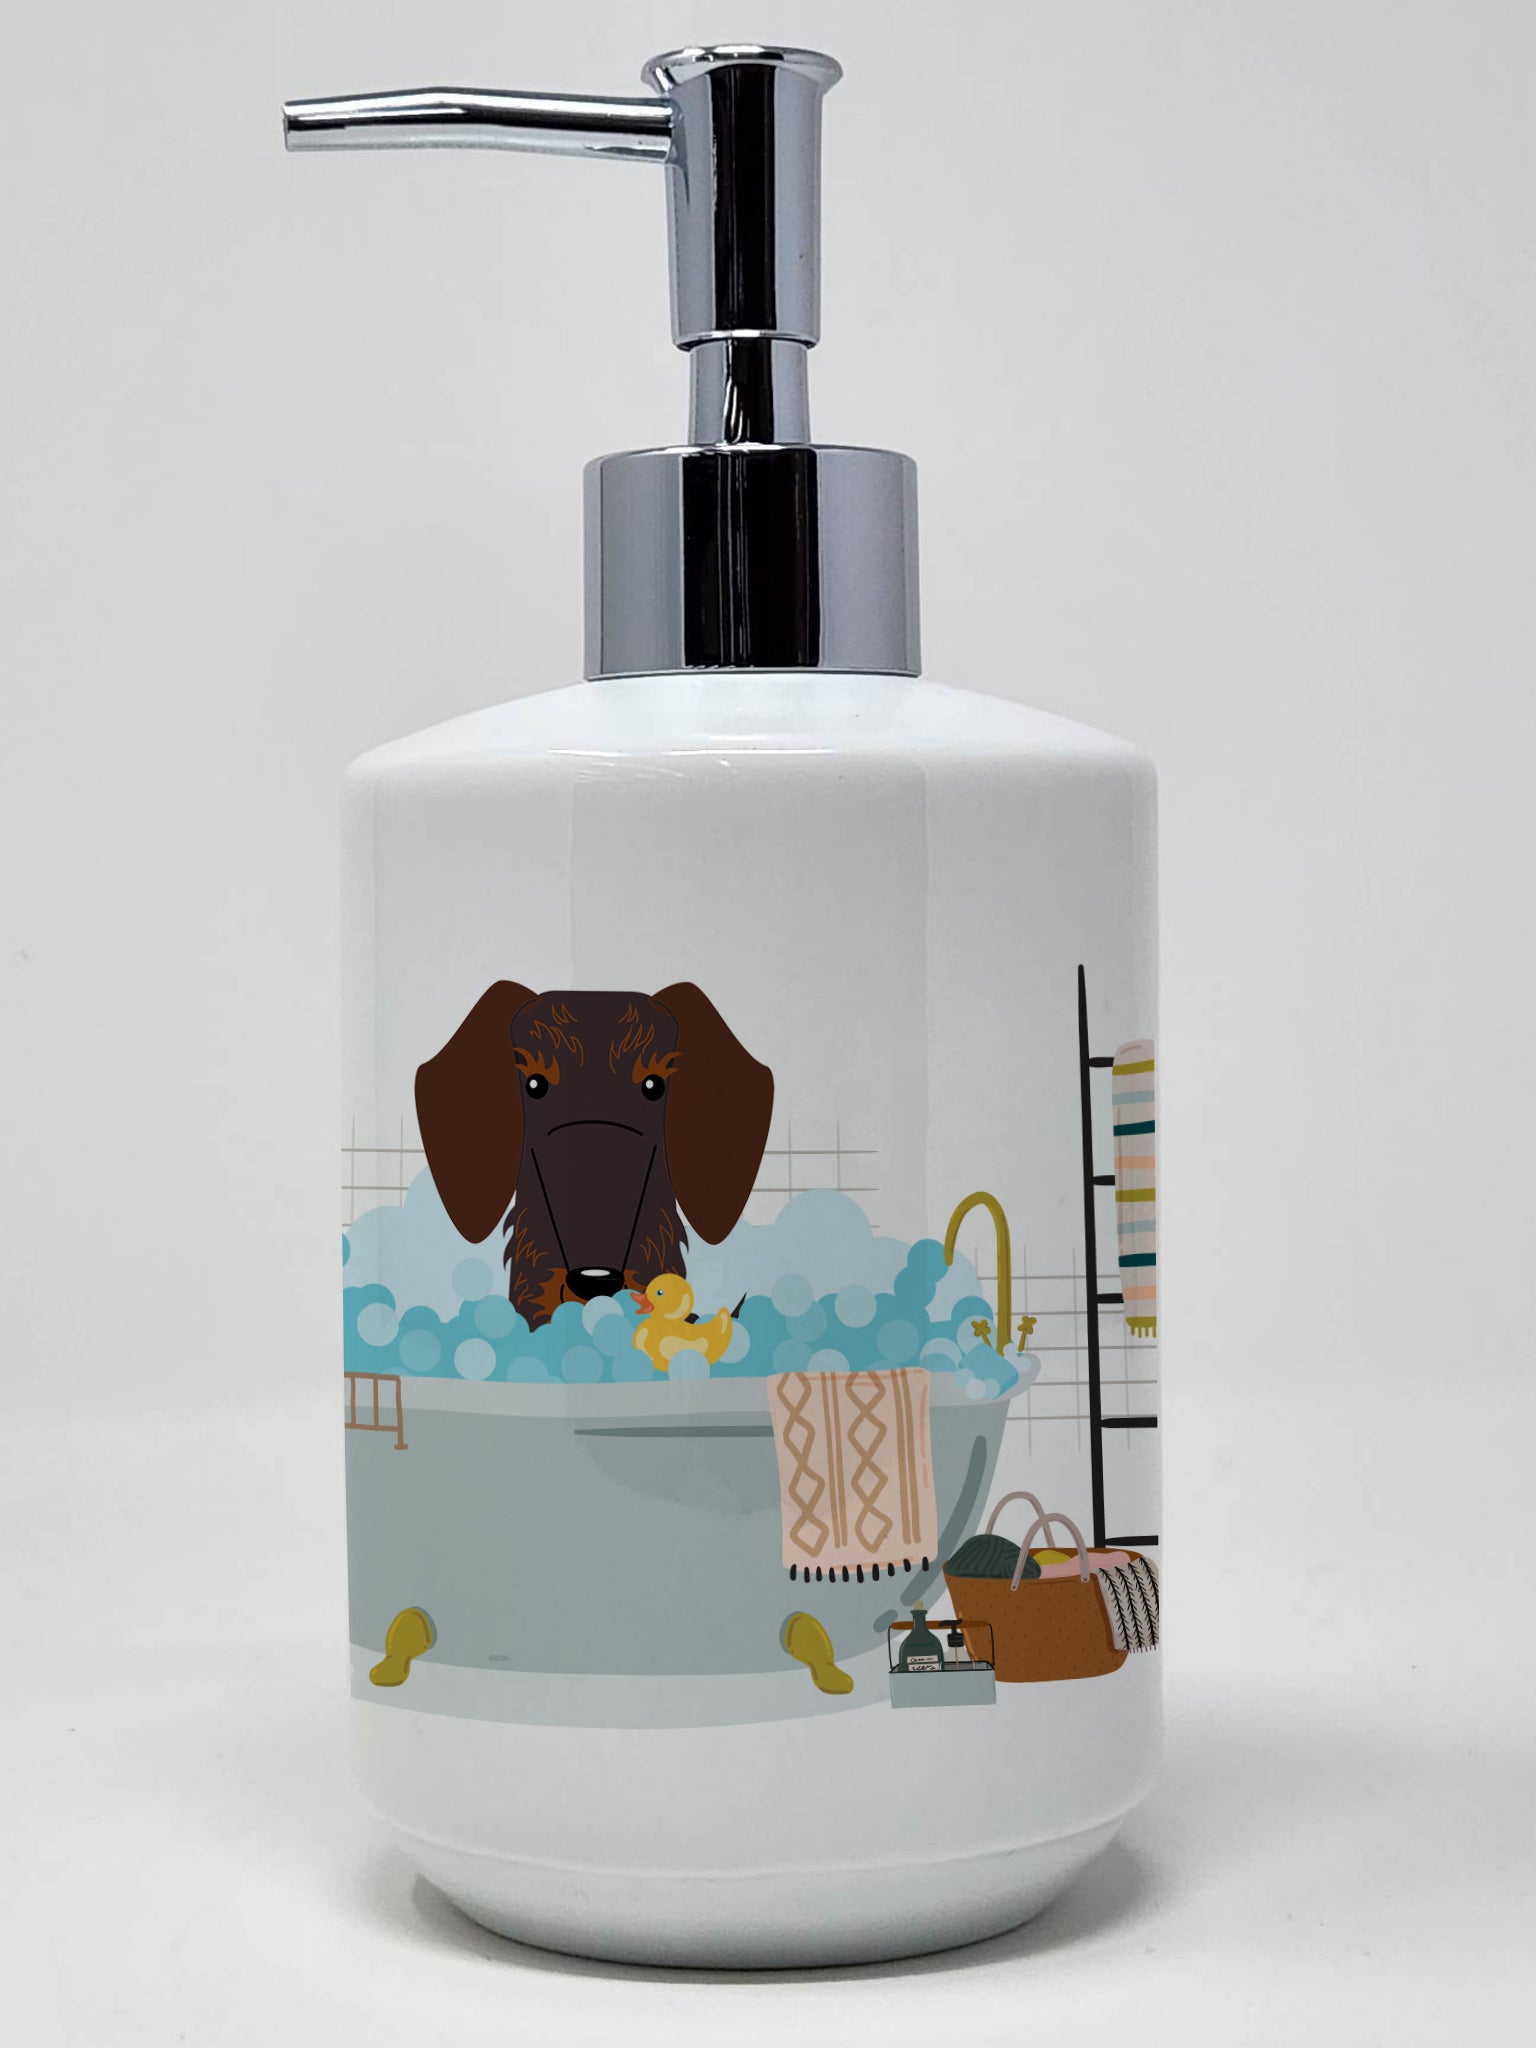 Buy this Chocolate Wire Haired Dachshund in Bathtub Ceramic Soap Dispenser